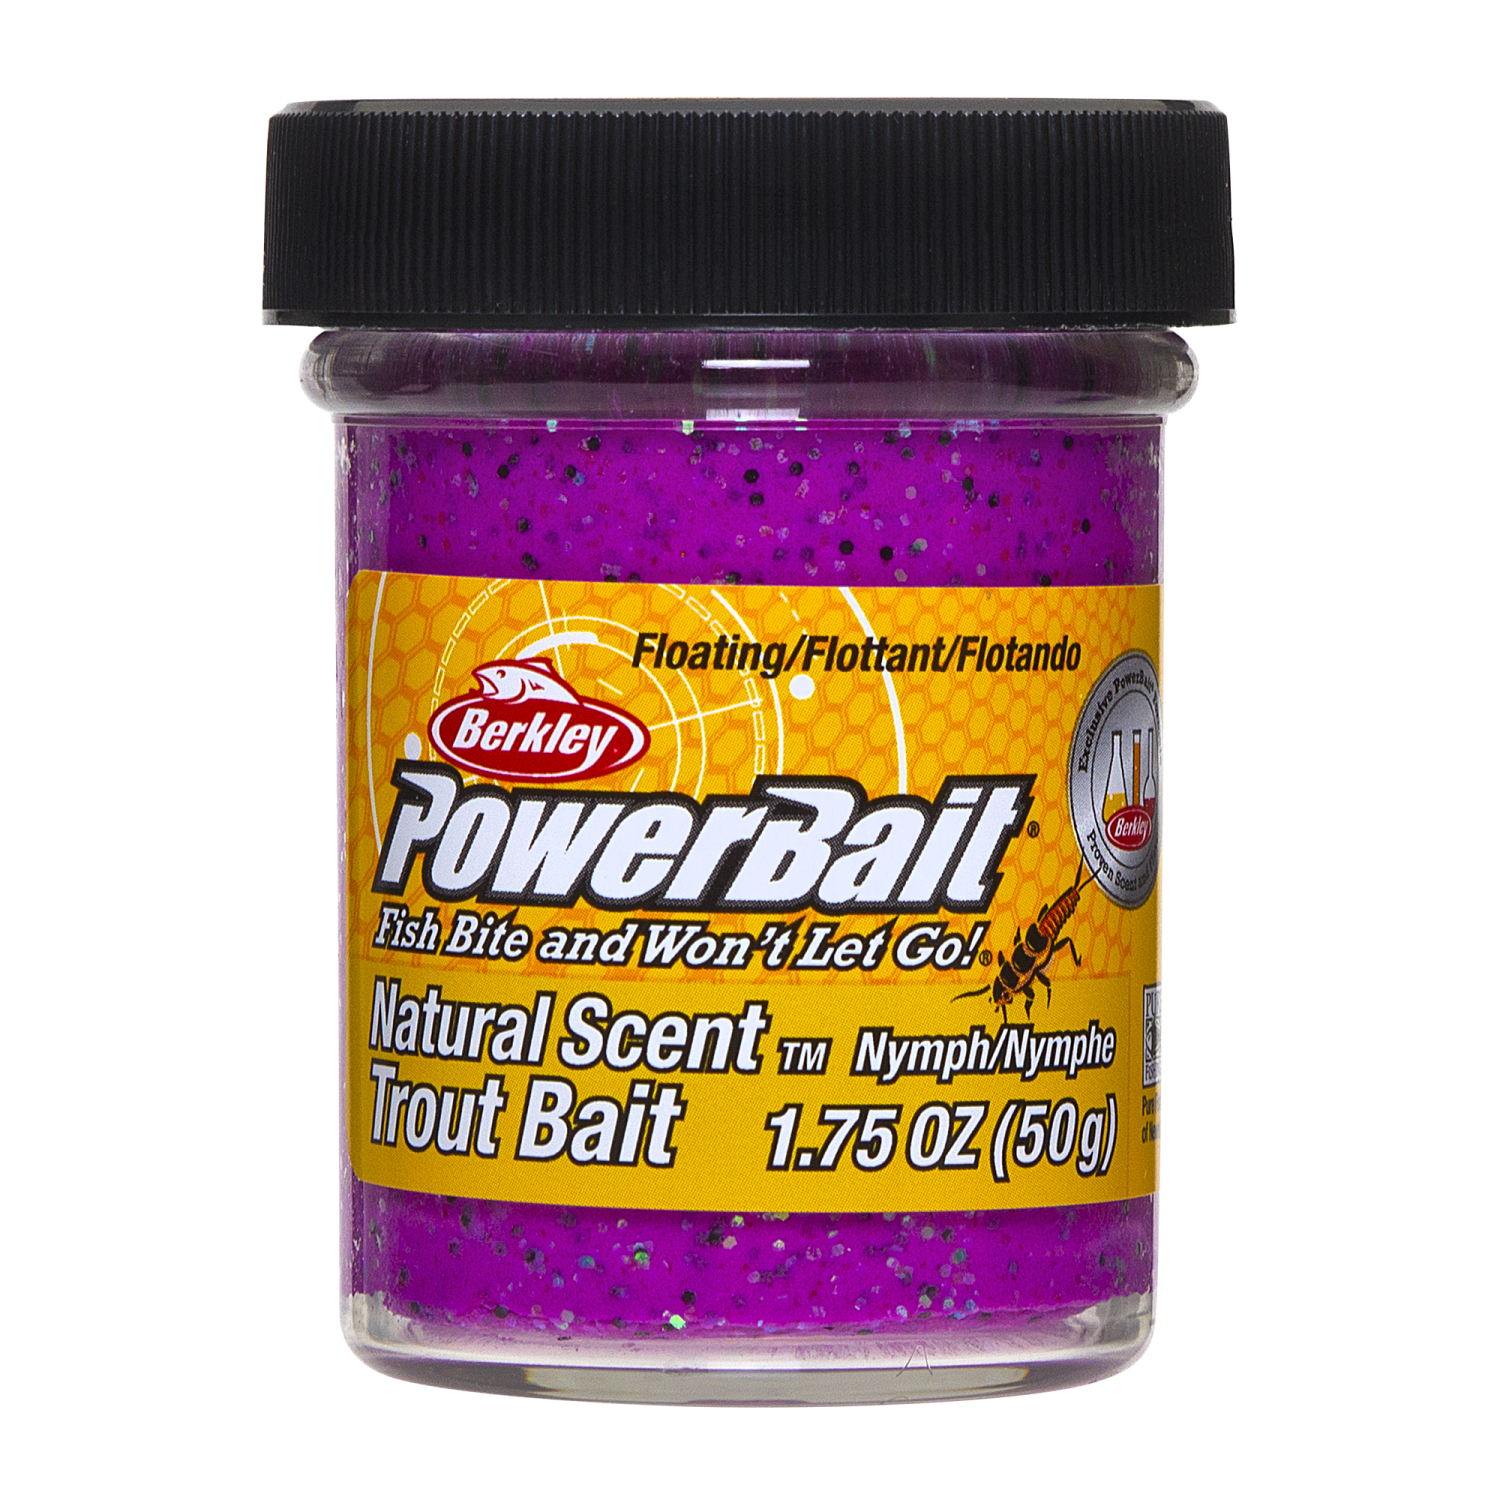 Паста форелевая Berkley PowerBait Natural Scent Trout Bait 50гр Nyrnph #Nymph with Glitter